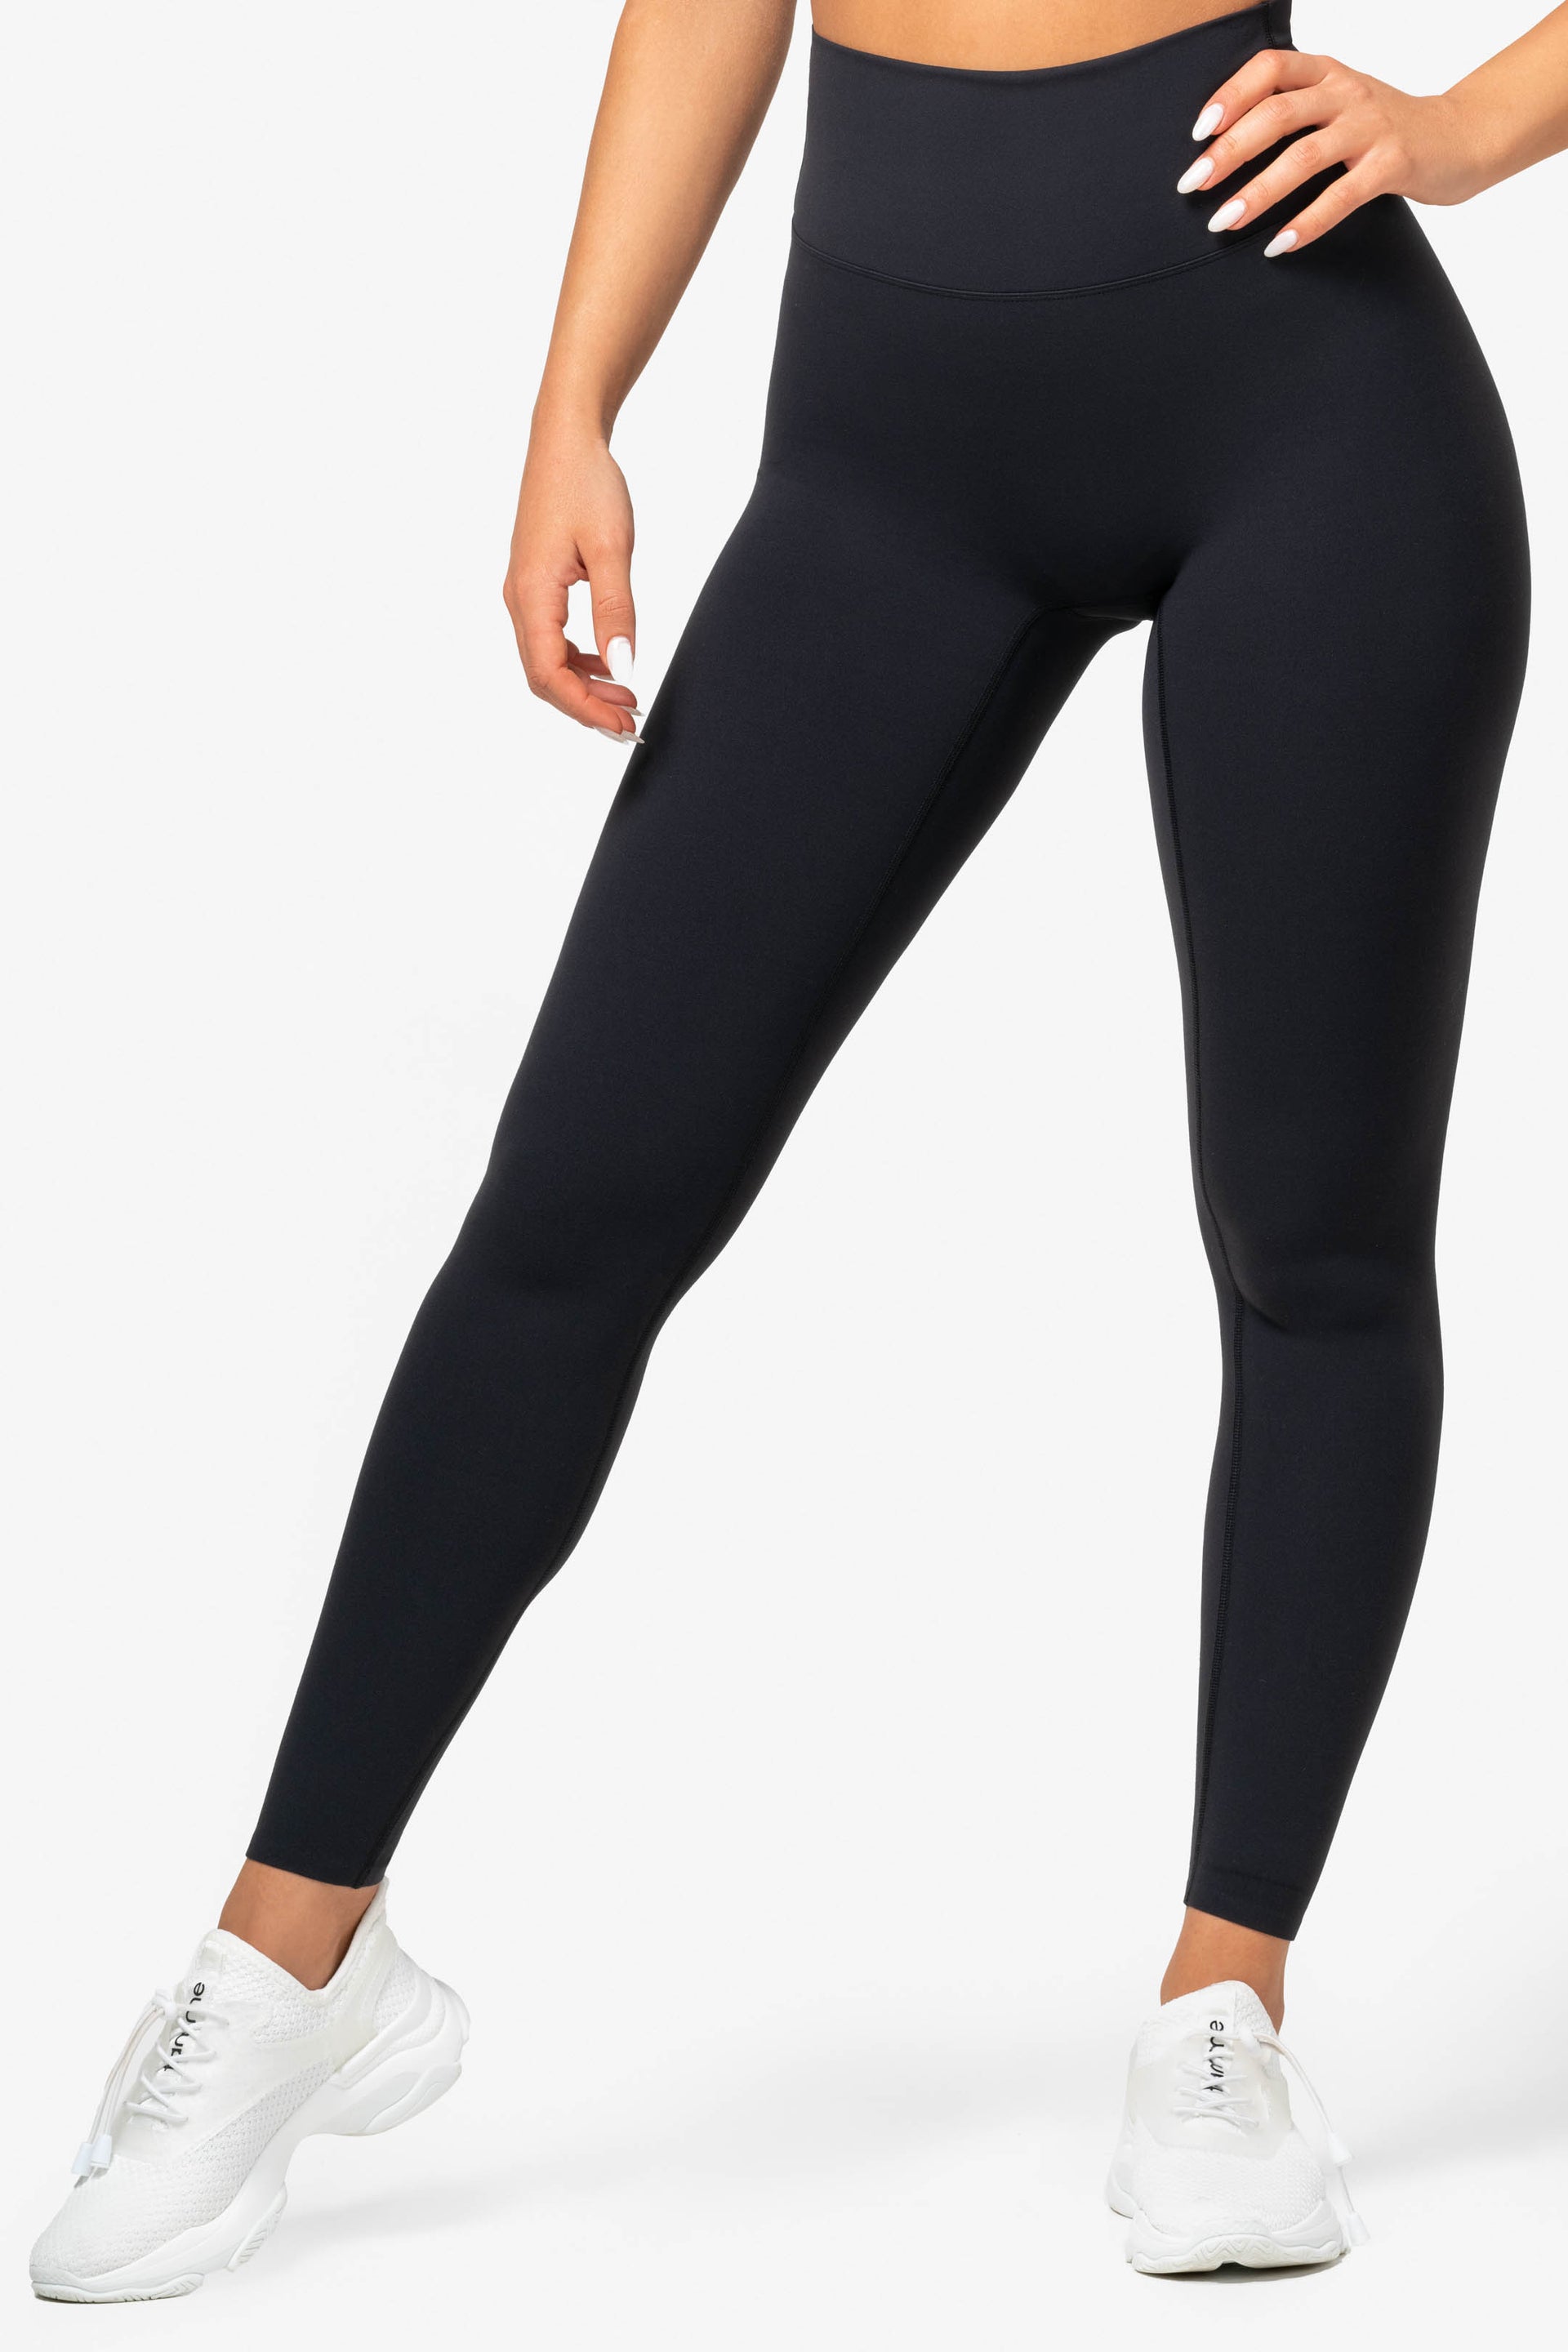 Annes styling Emma Womens High Waisted Seamless Leggings